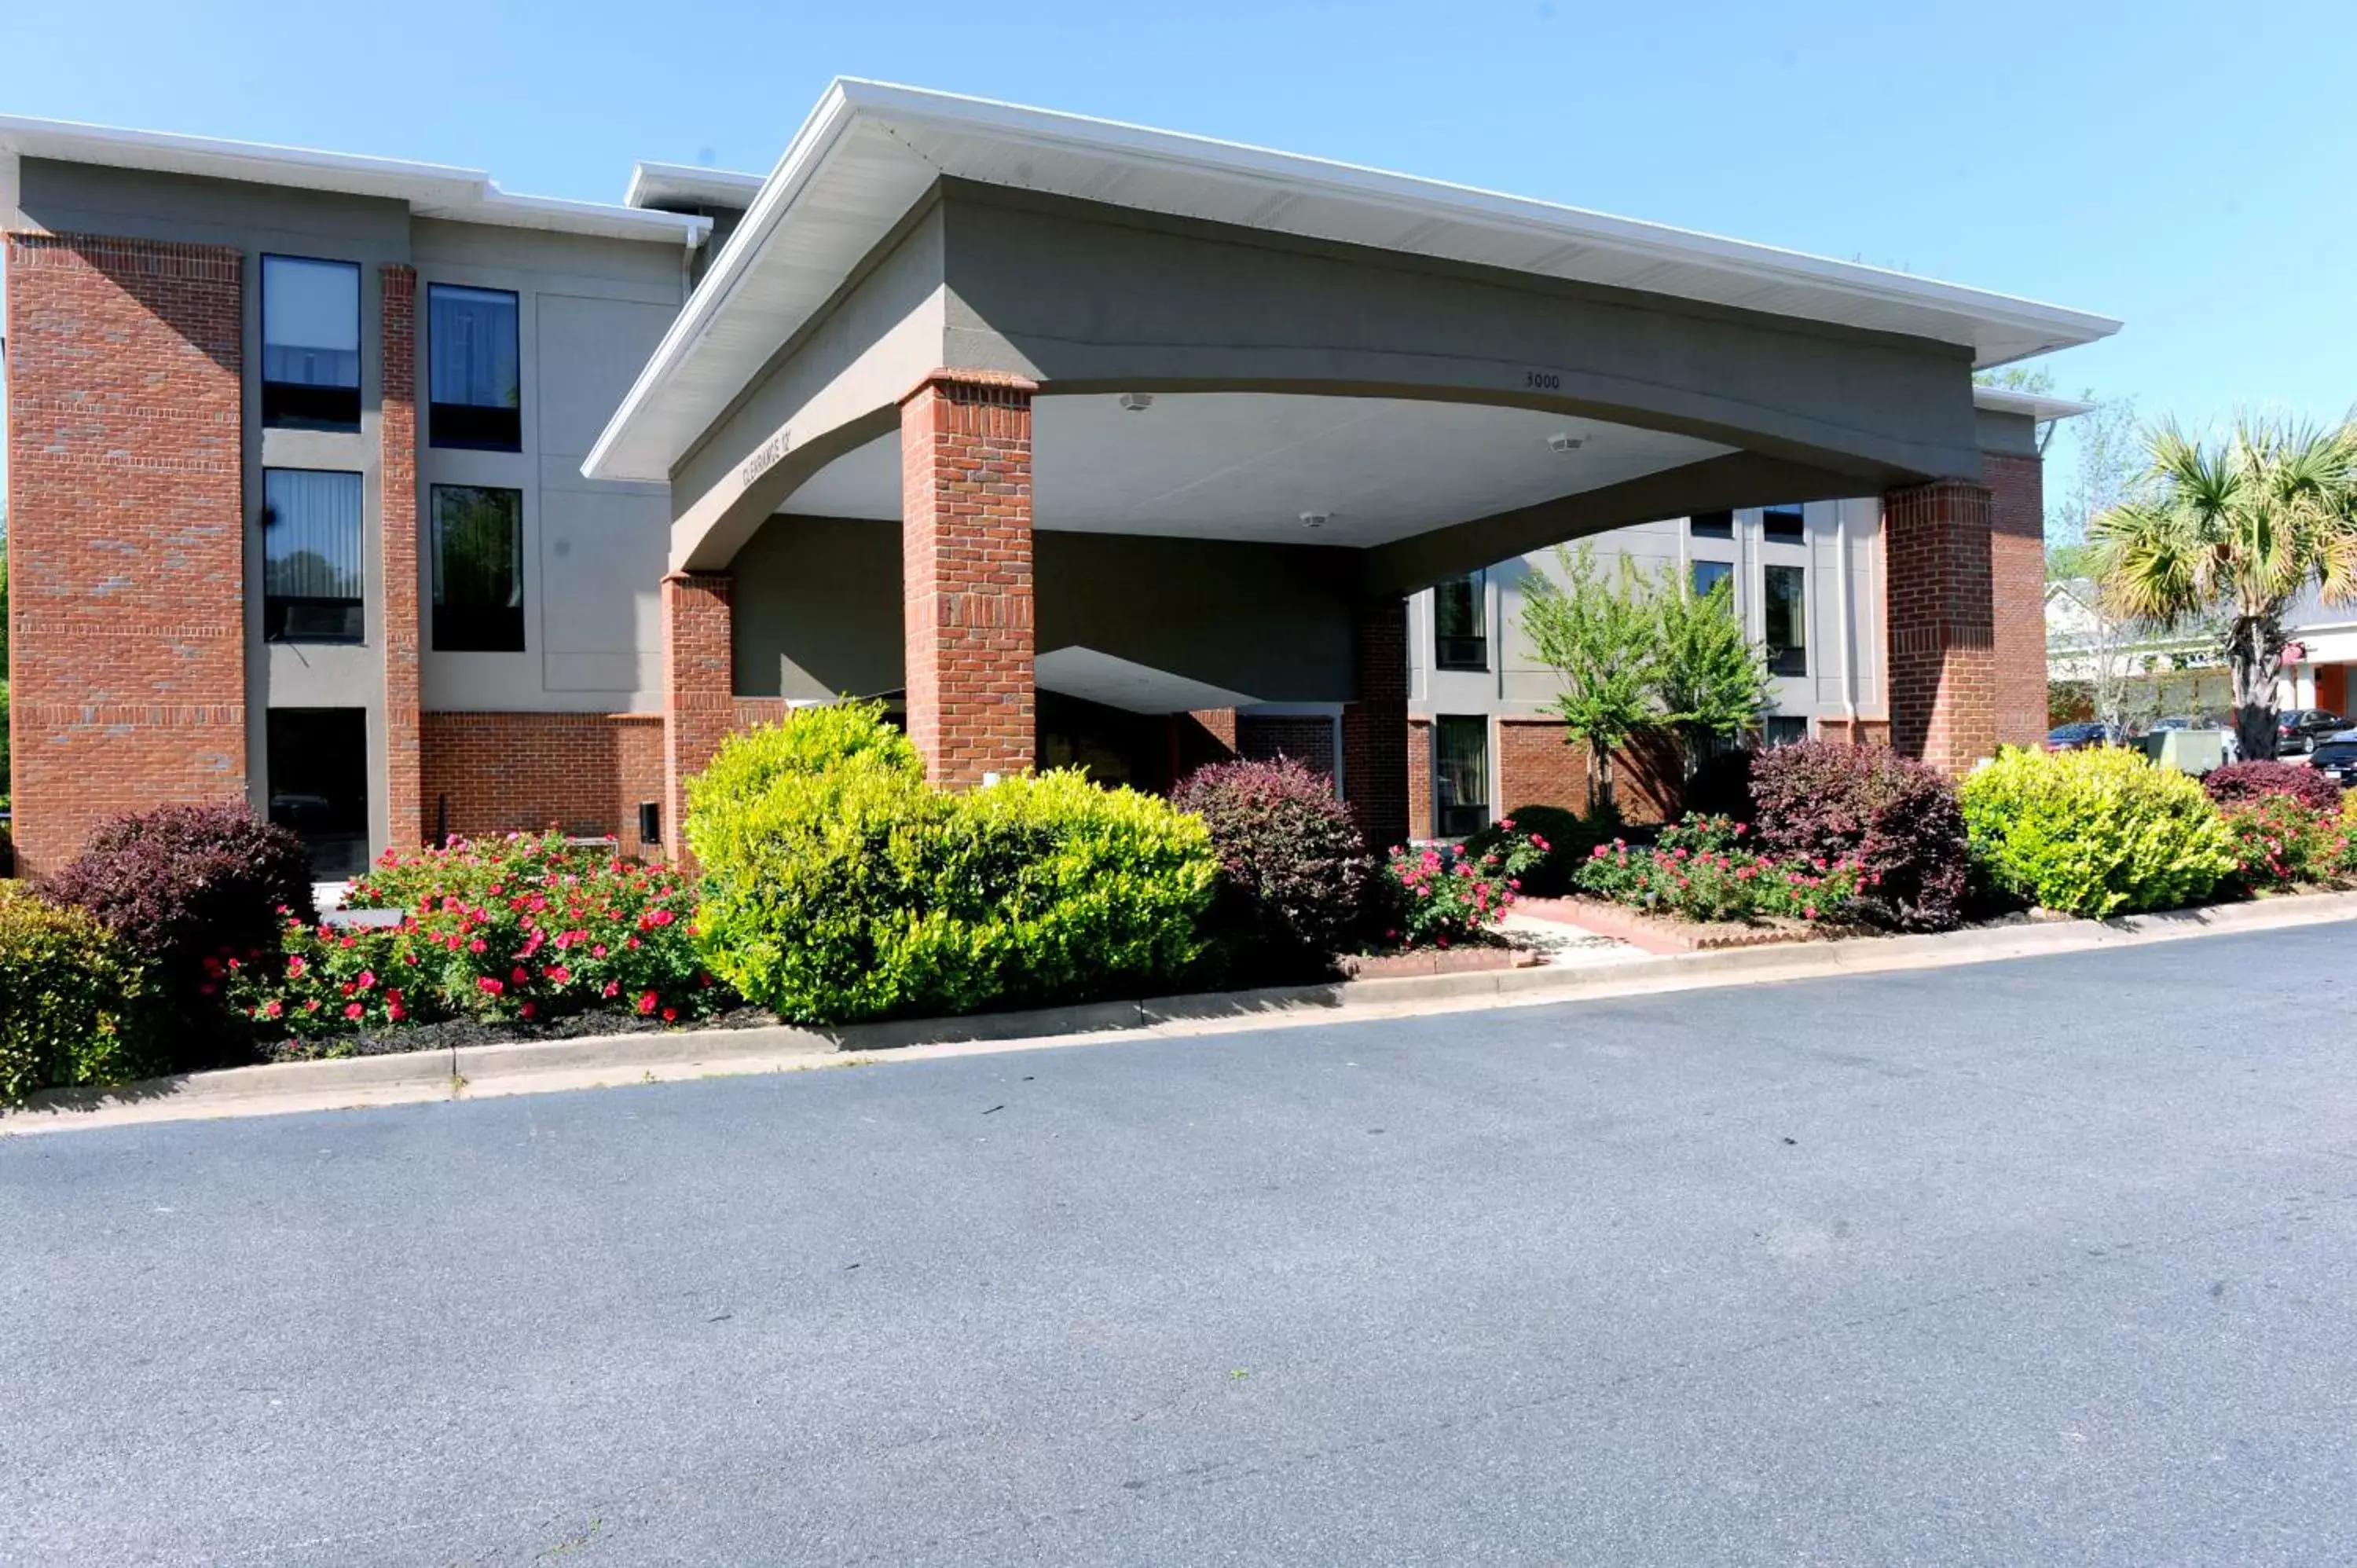 Property Building in Country Inn & Suites by Radisson, Alpharetta, GA